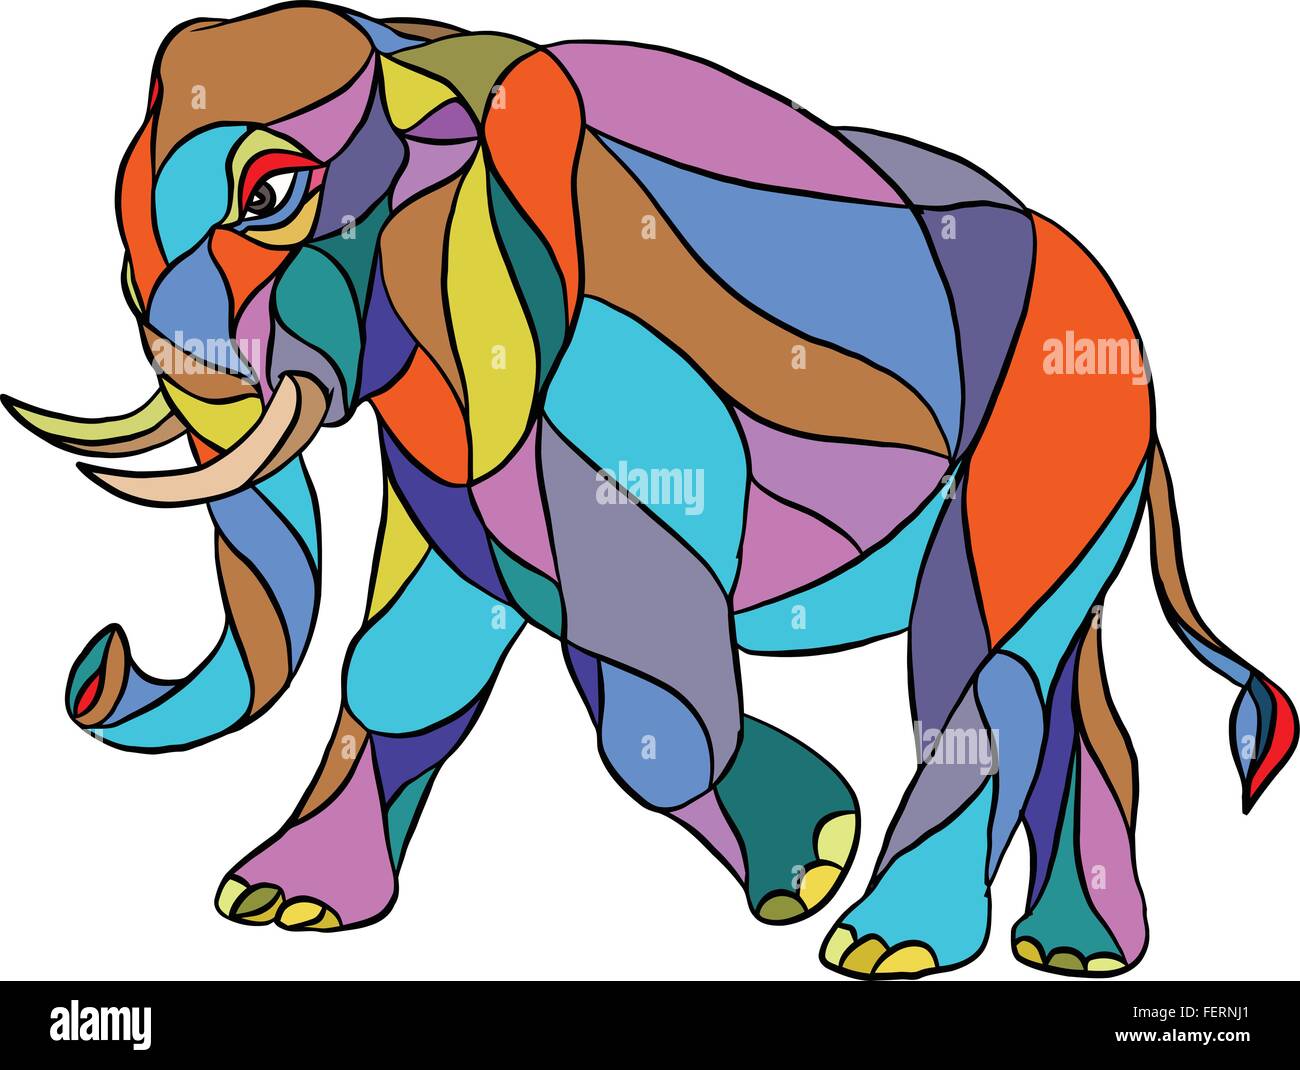 Mosaic style illustration of an angry elephant wth tusks walking viewed from the side set on isolated white background. Stock Vector